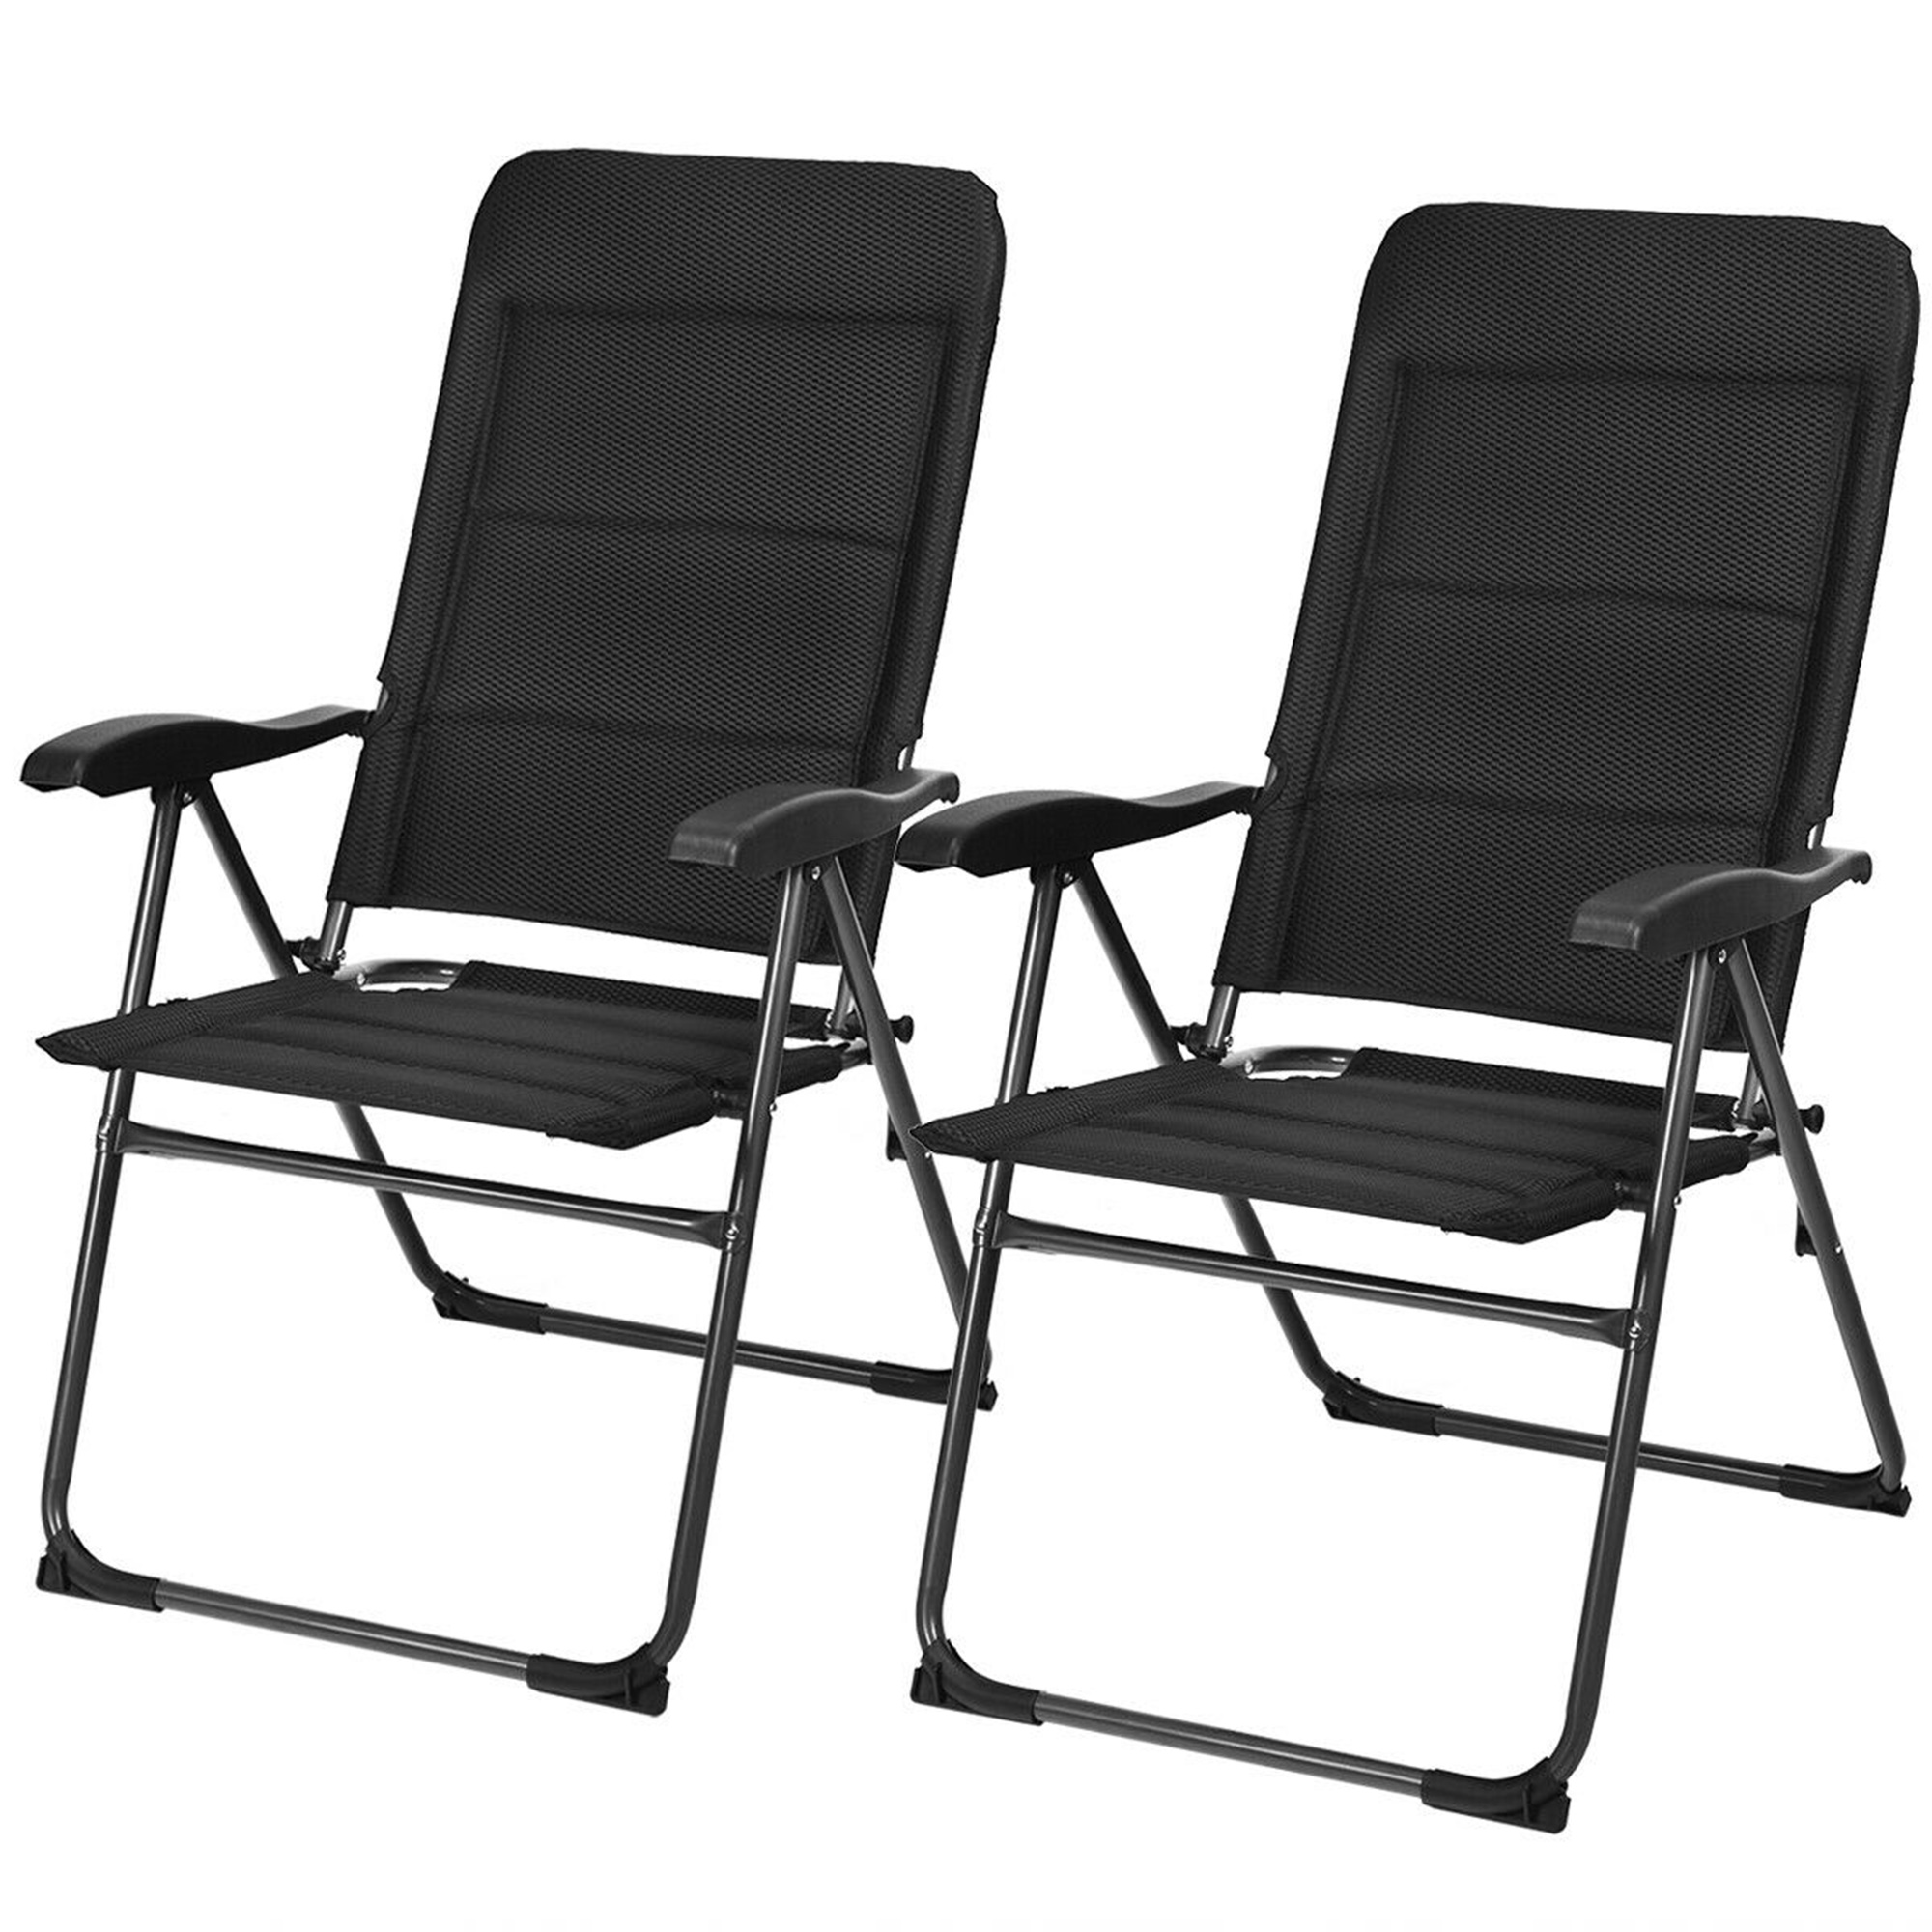 Costway 2PCS Patio Folding Chairs Back Adjustable Reclining Padded Garden Furniture